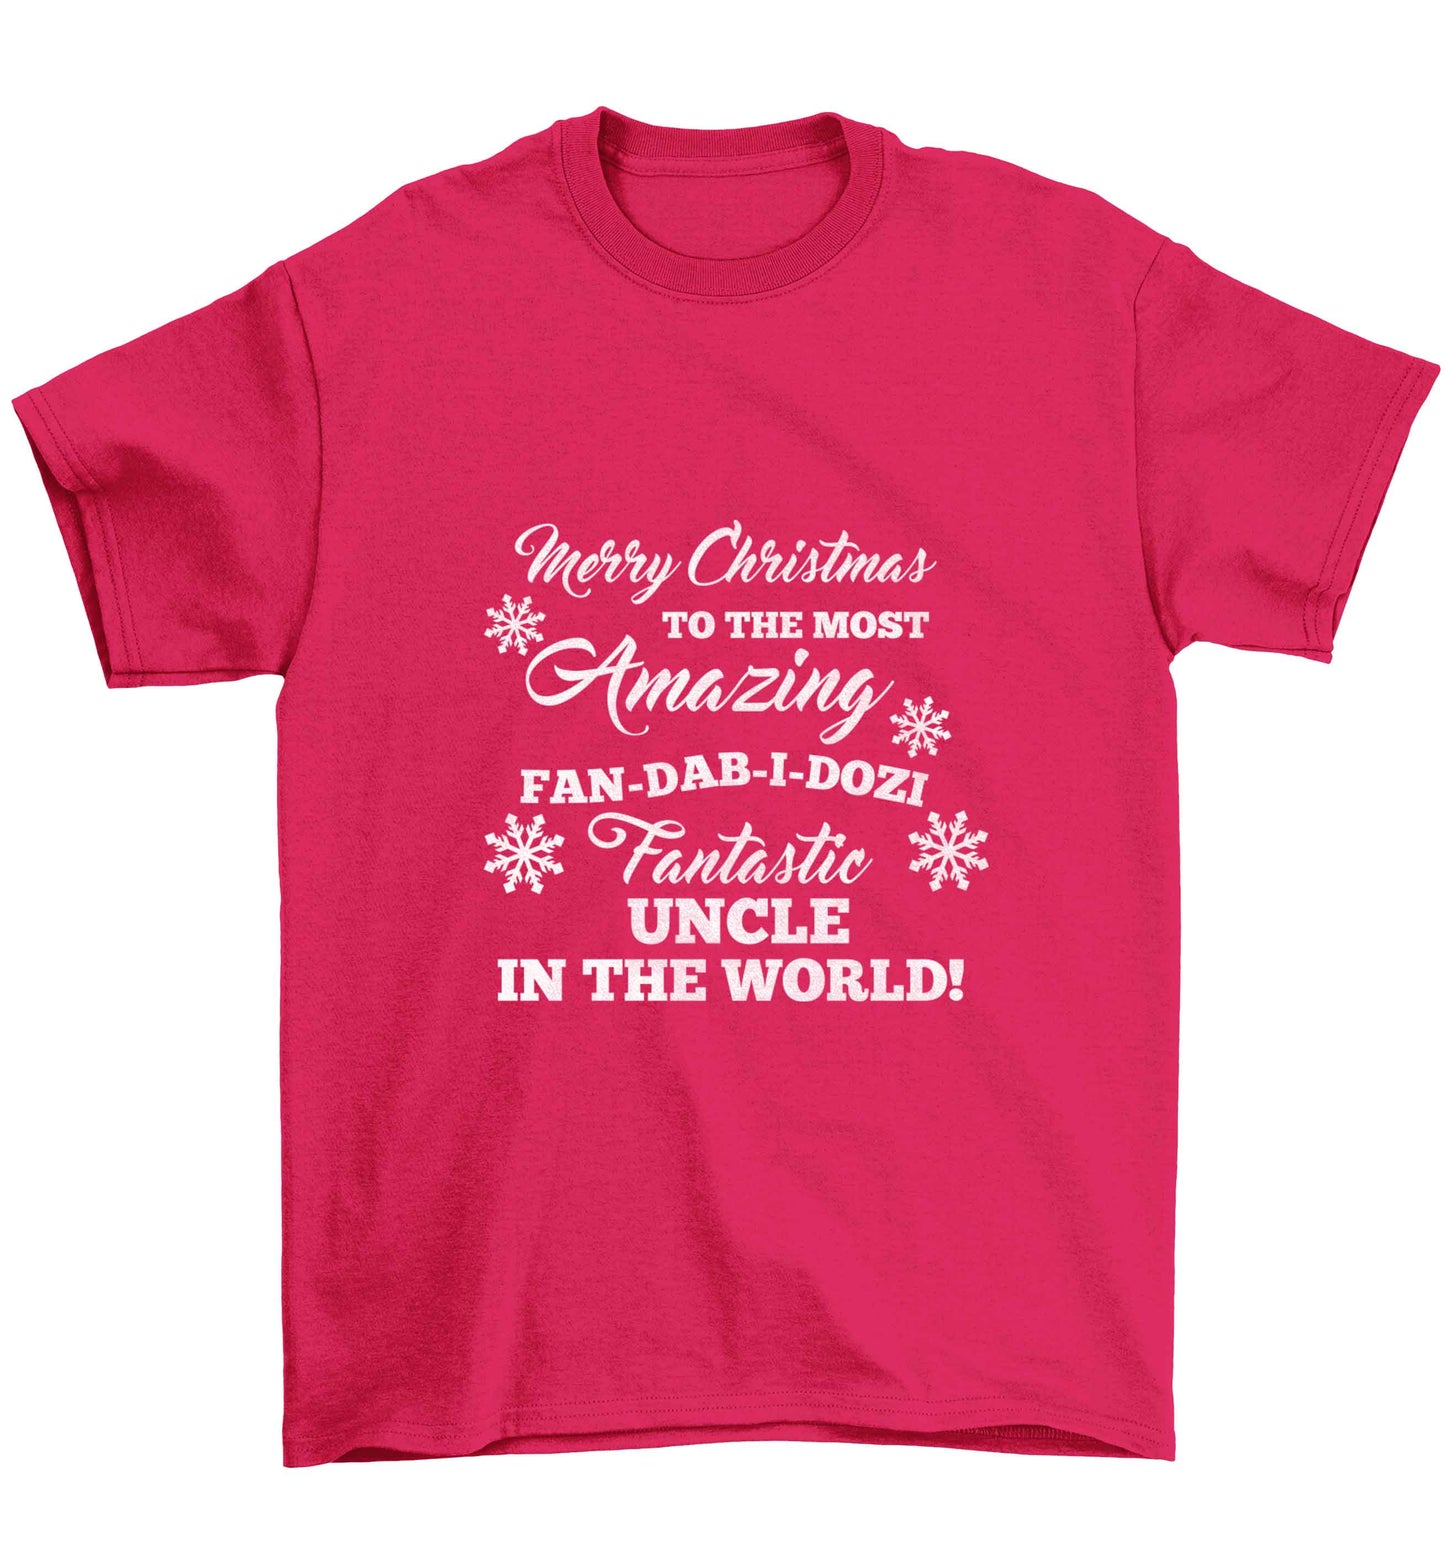 Merry Christmas to the most amazing fan-dab-i-dozi fantasic Uncle in the world Children's pink Tshirt 12-13 Years